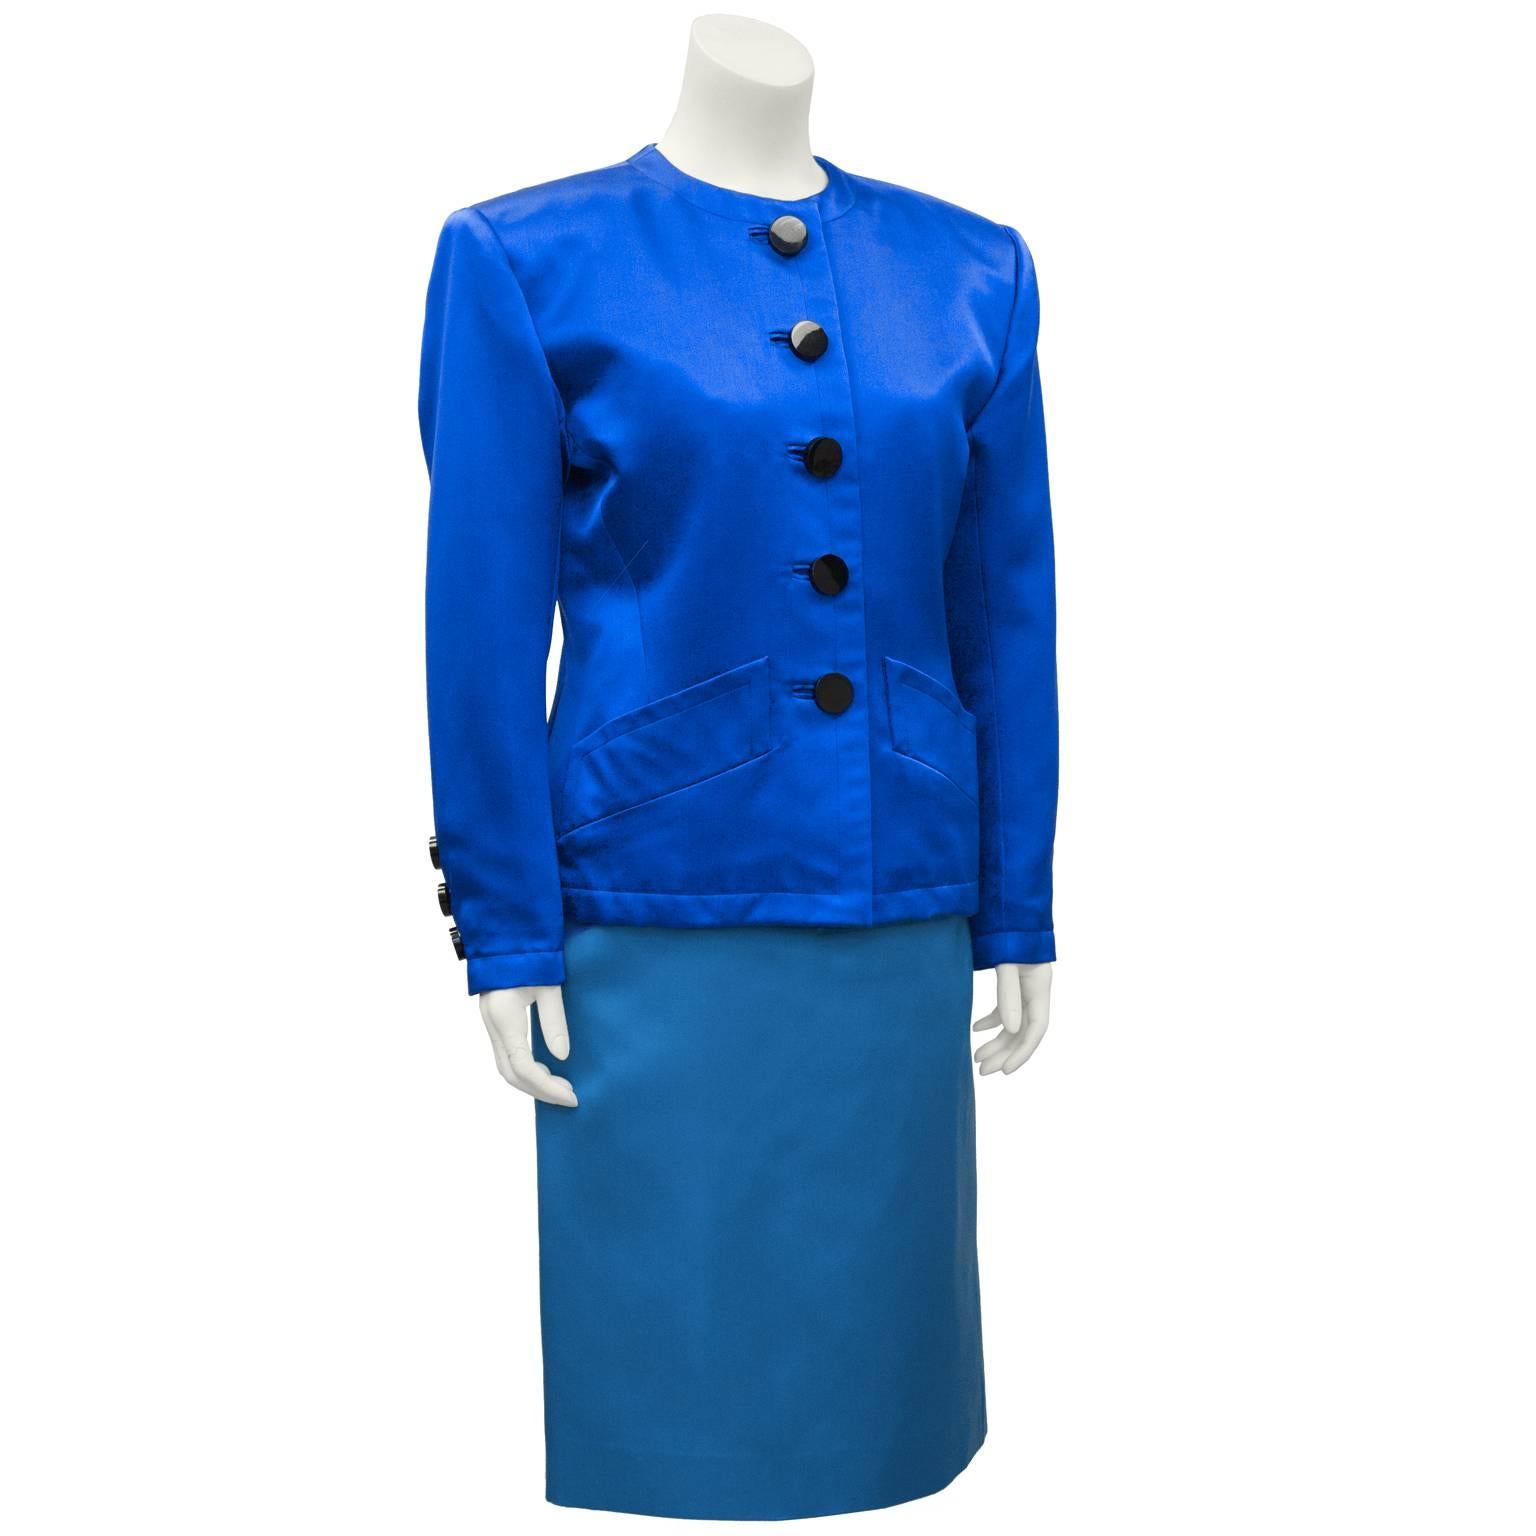 Unusual Yves Saint Laurent/YSL shades of blue skirt suit from the 1980's. Structured royal blue cotton jacket with a round collar, diagonal top slit pockets and large black buttons up the front. The teal blue skirt has a banded waist, matching top